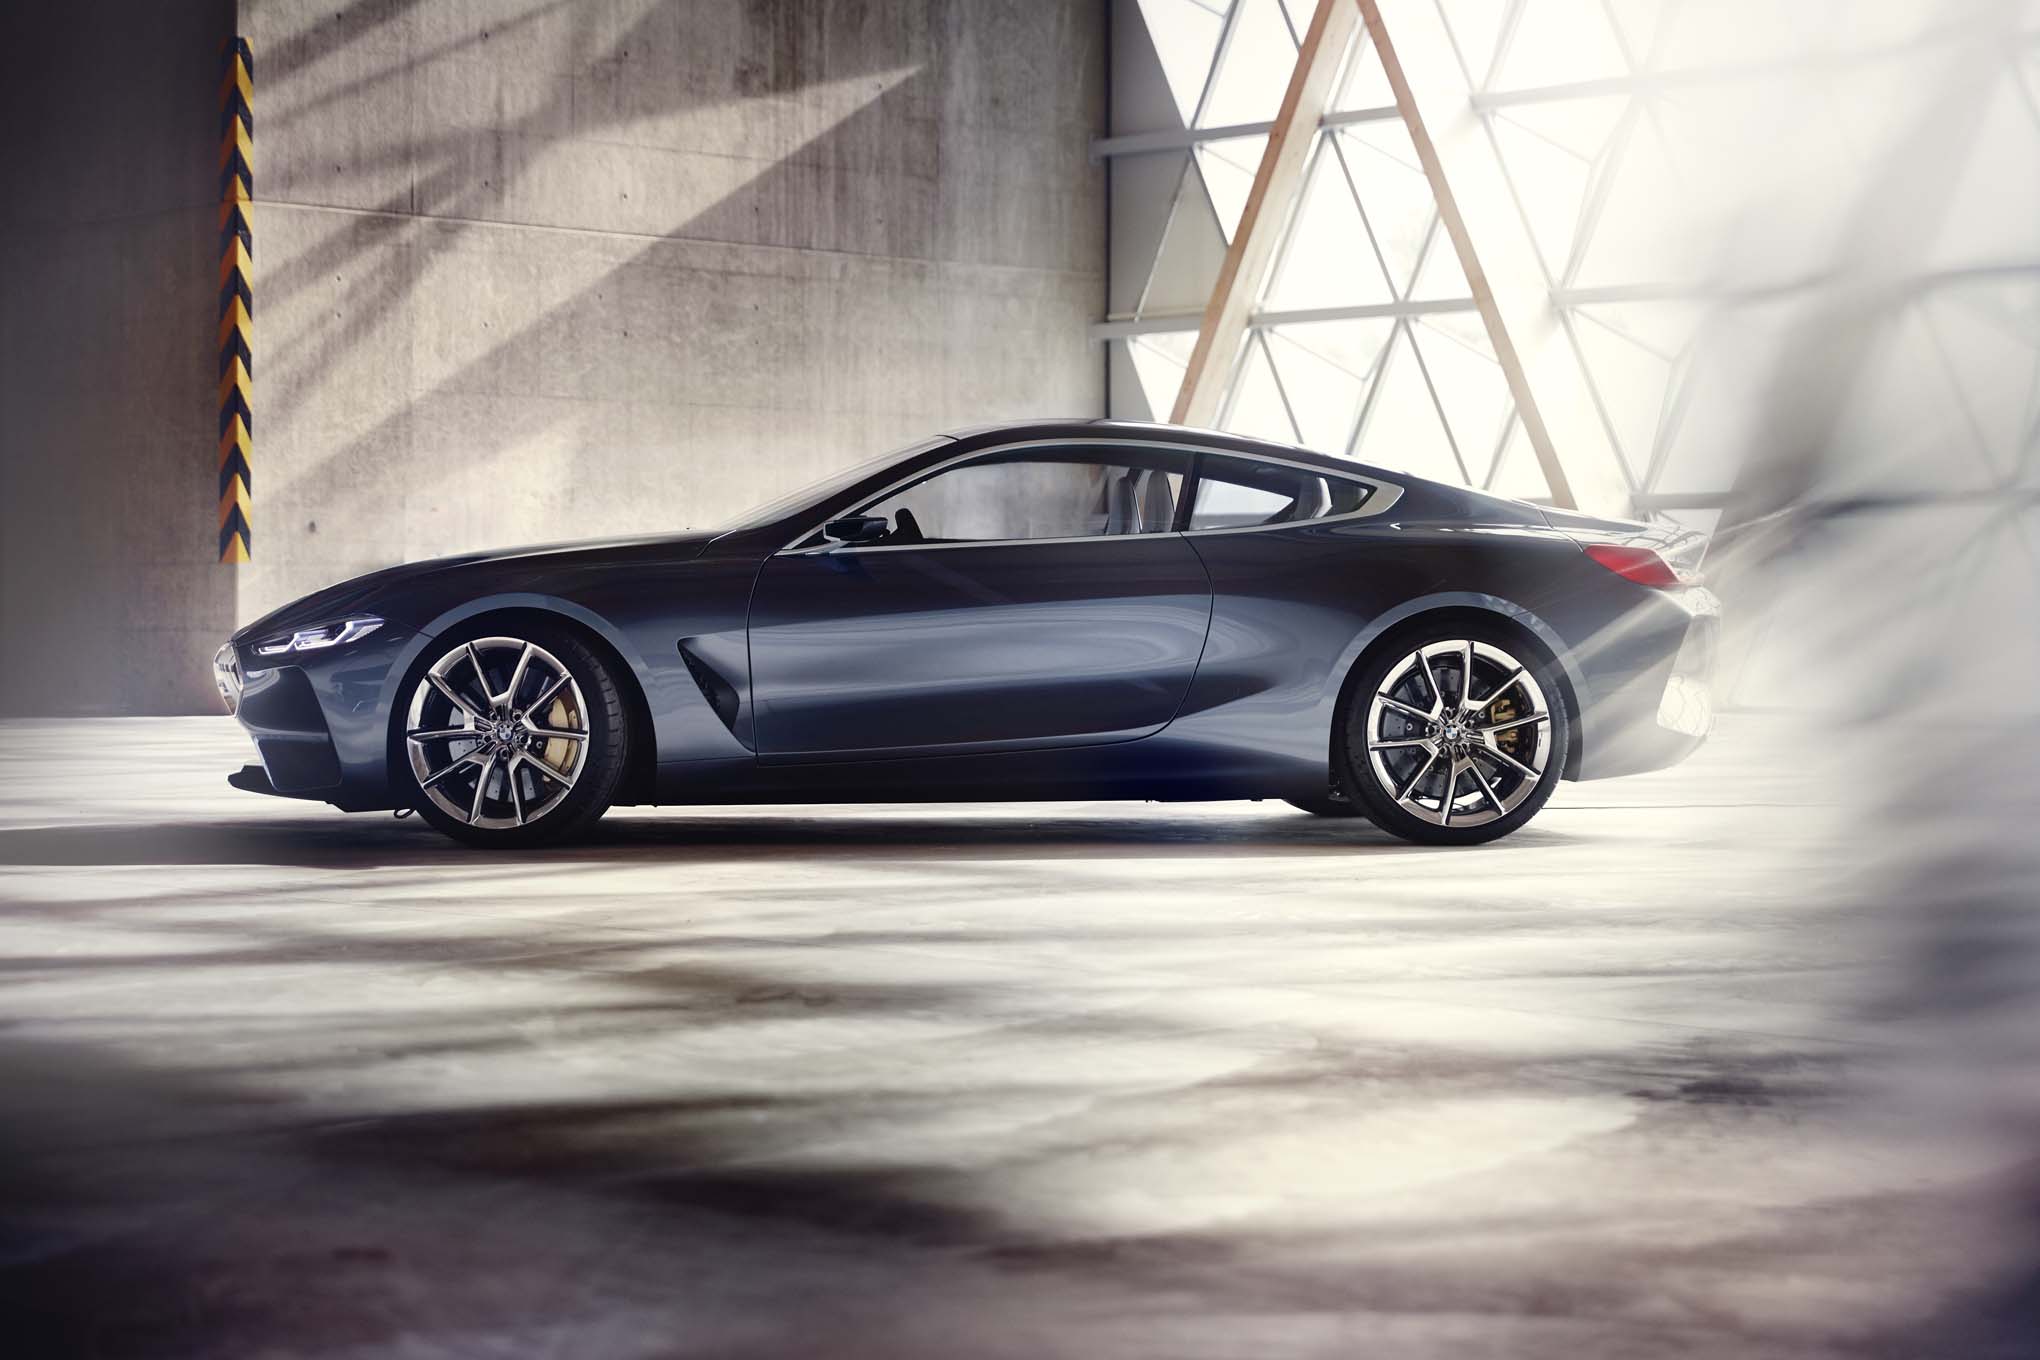 BMW Concept 8 Series teases at next great luxury coupe